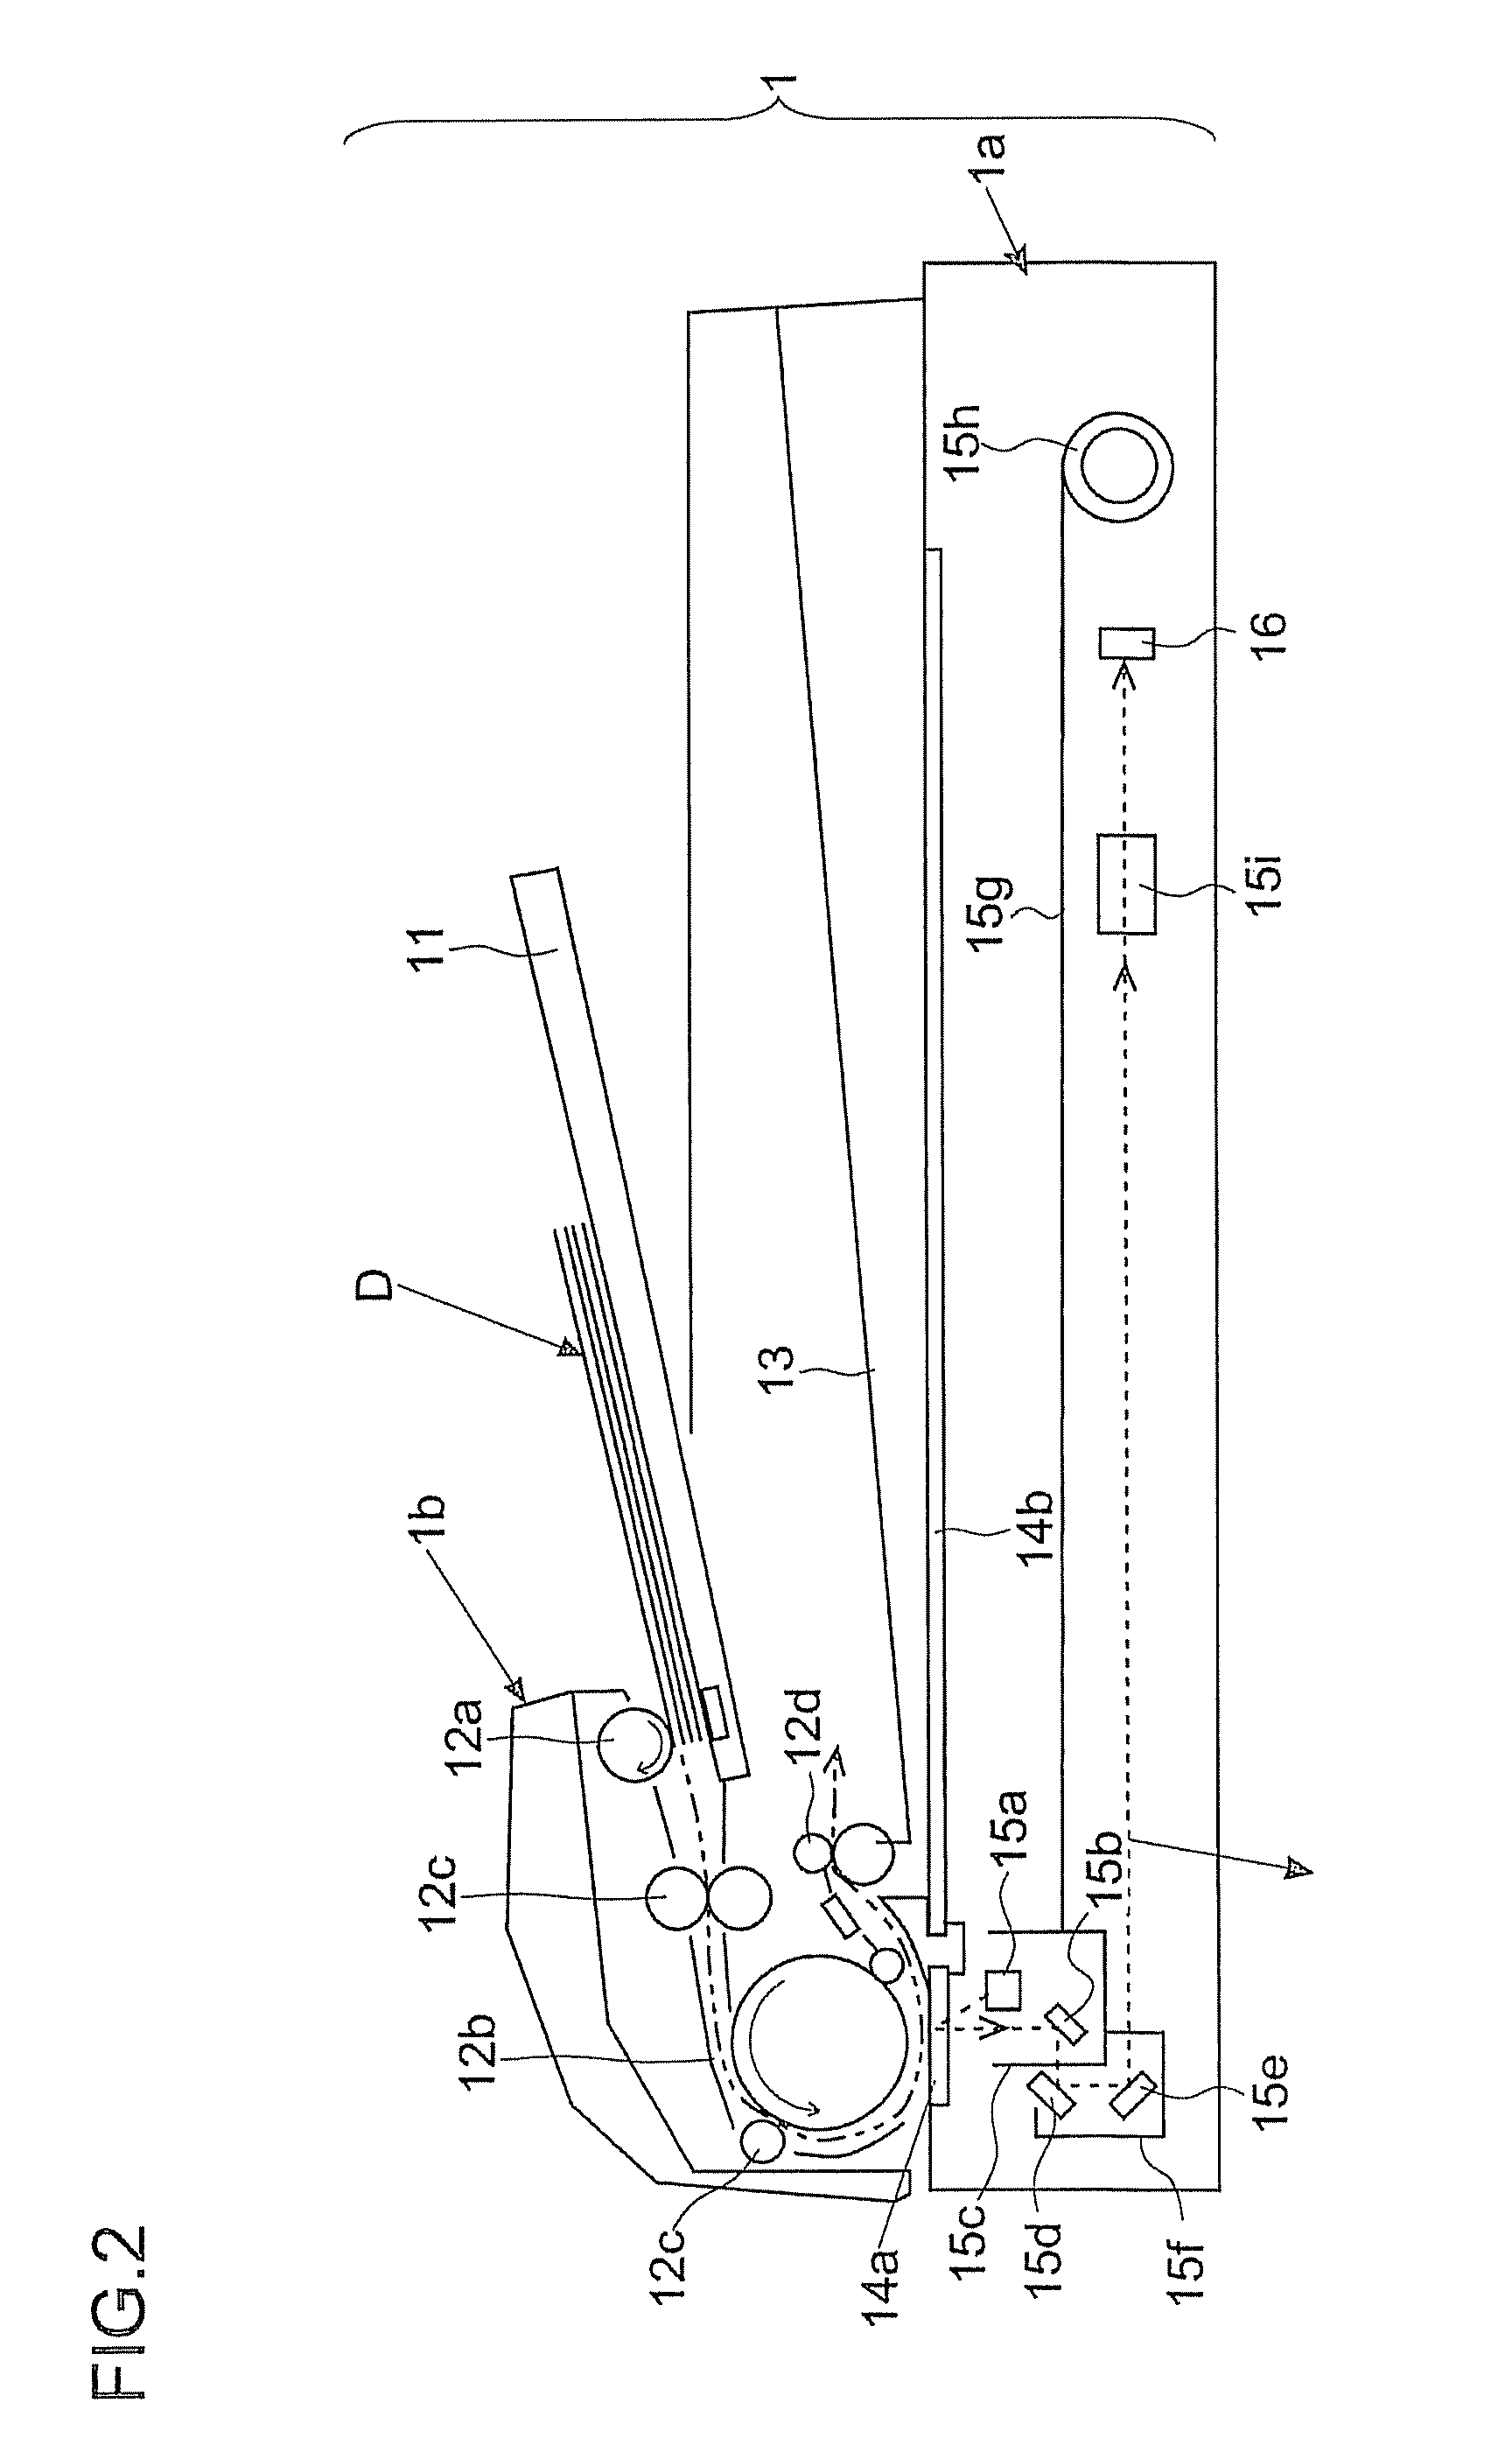 Image forming apparatus and control method of an image forming apparatus having an ordinary reading mode and a quiet reading mode